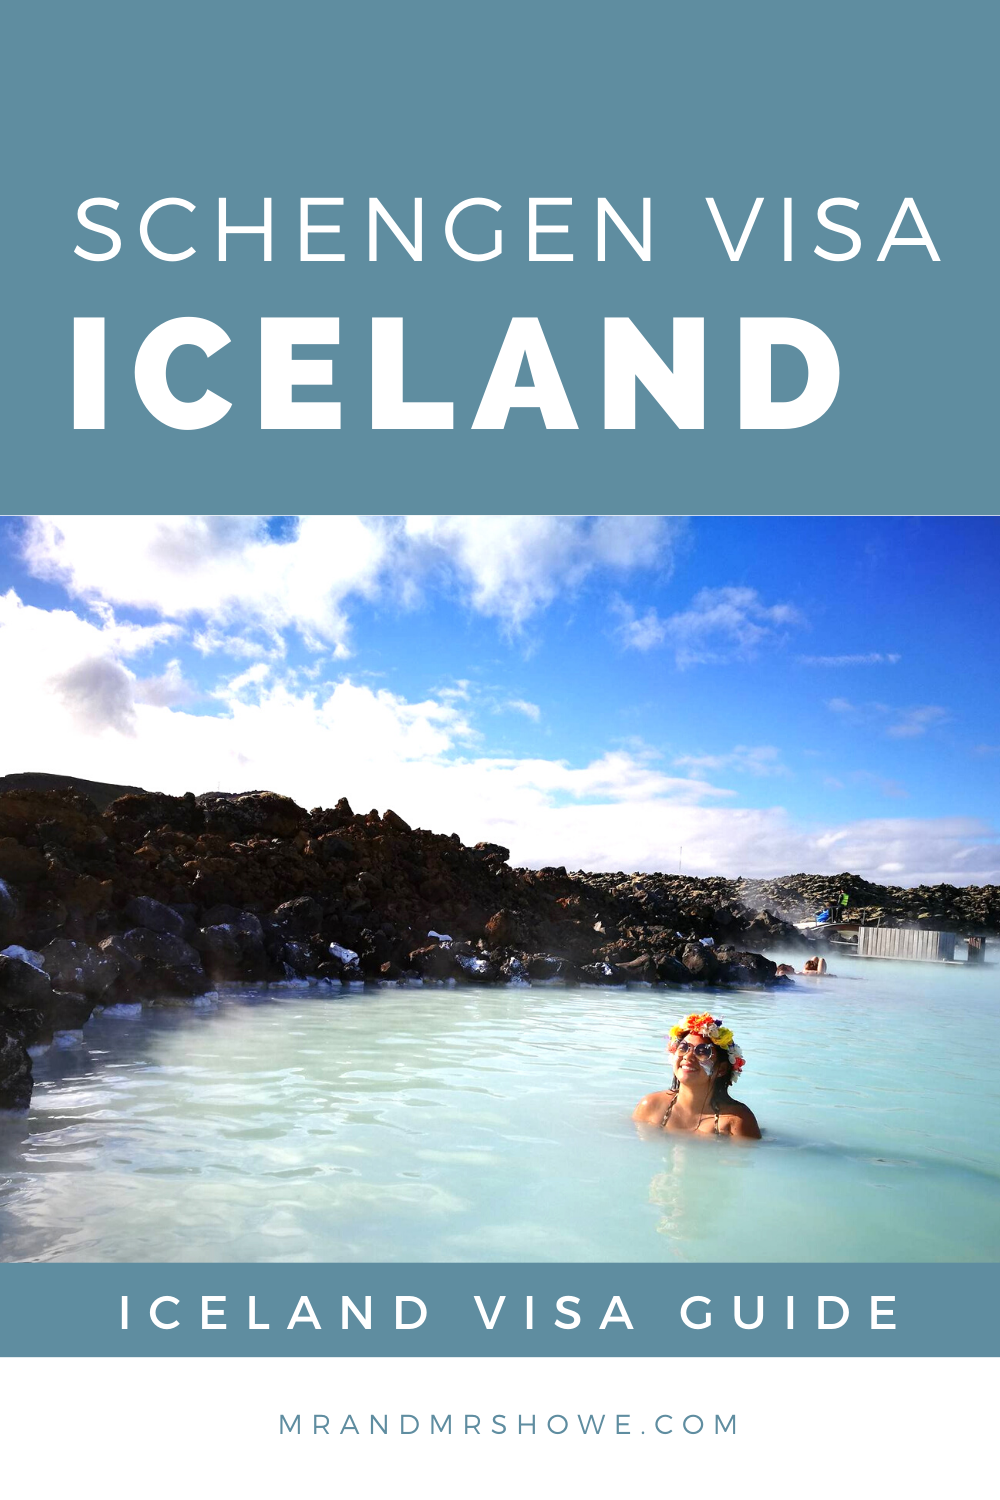 How To Apply For Iceland Schengen Visa For Philippine Passport Holders1.png